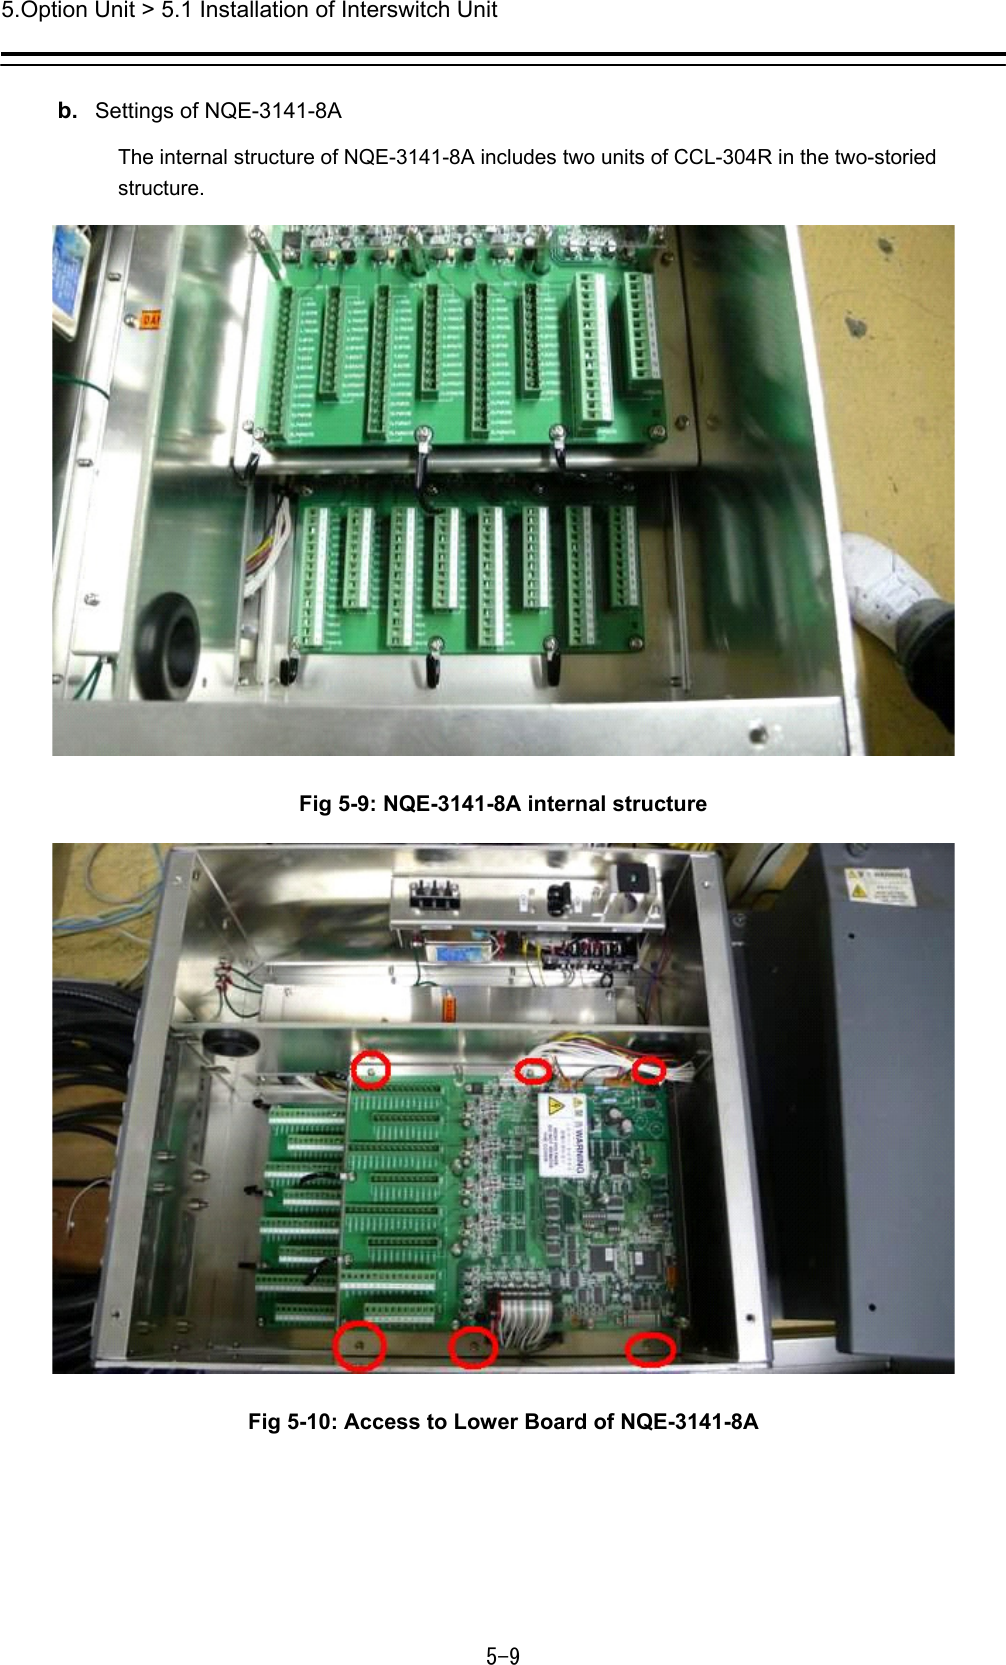 5.Option Unit &gt; 5.1 Installation of Interswitch Unit 5-9  b.  Settings of NQE-3141-8A The internal structure of NQE-3141-8A includes two units of CCL-304R in the two-storied structure.  Fig 5-9: NQE-3141-8A internal structure  Fig 5-10: Access to Lower Board of NQE-3141-8A    